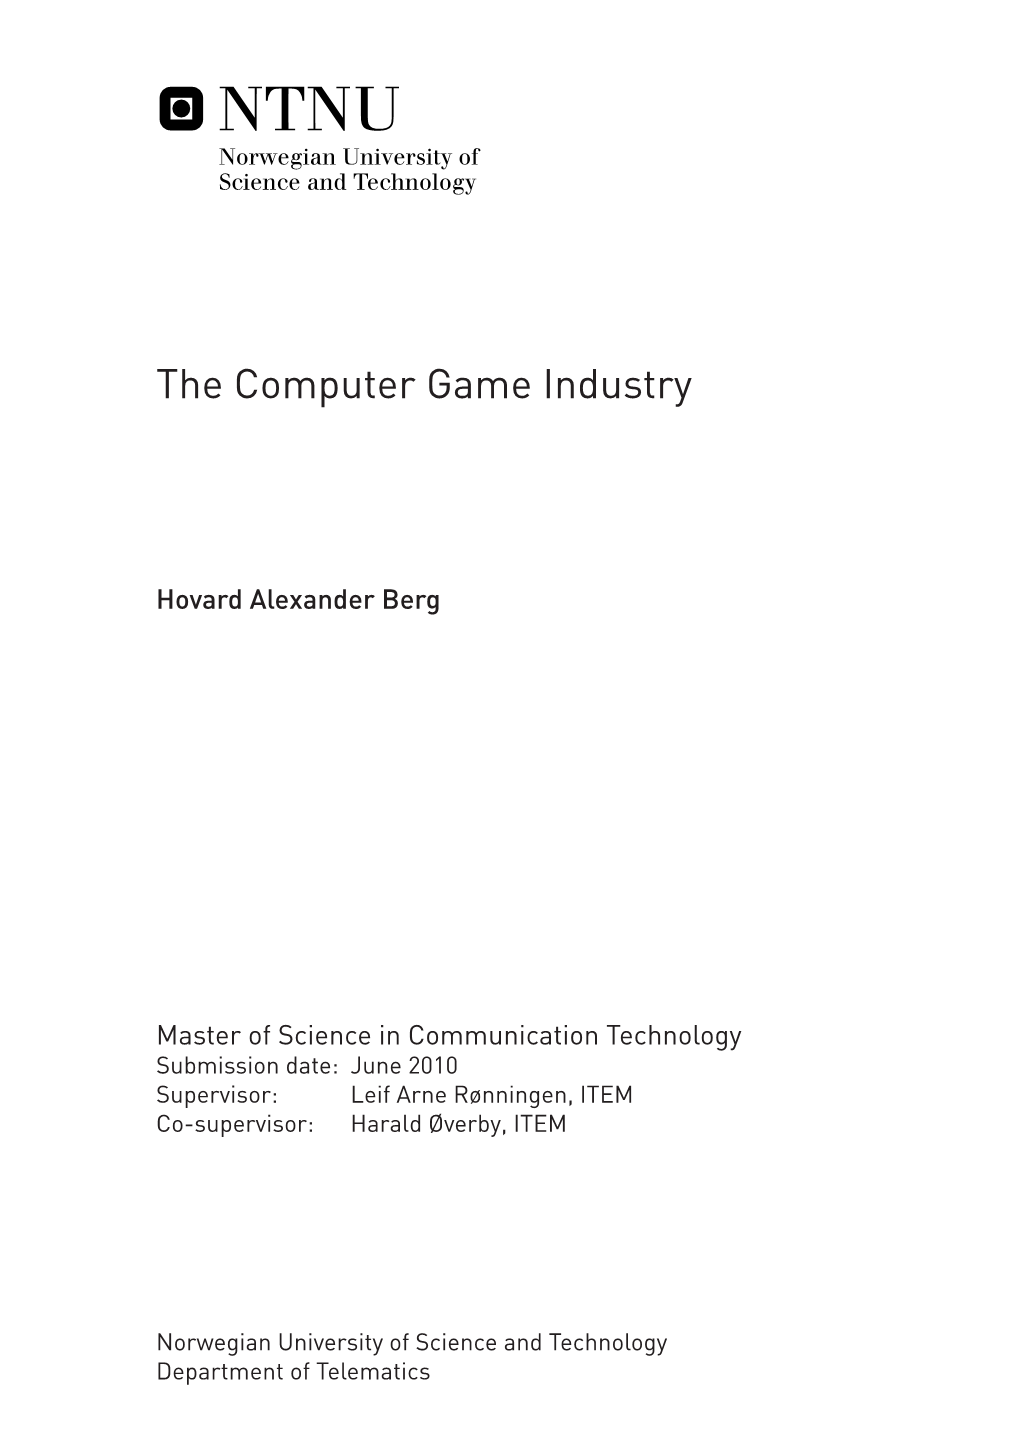 The Computer Game Industry